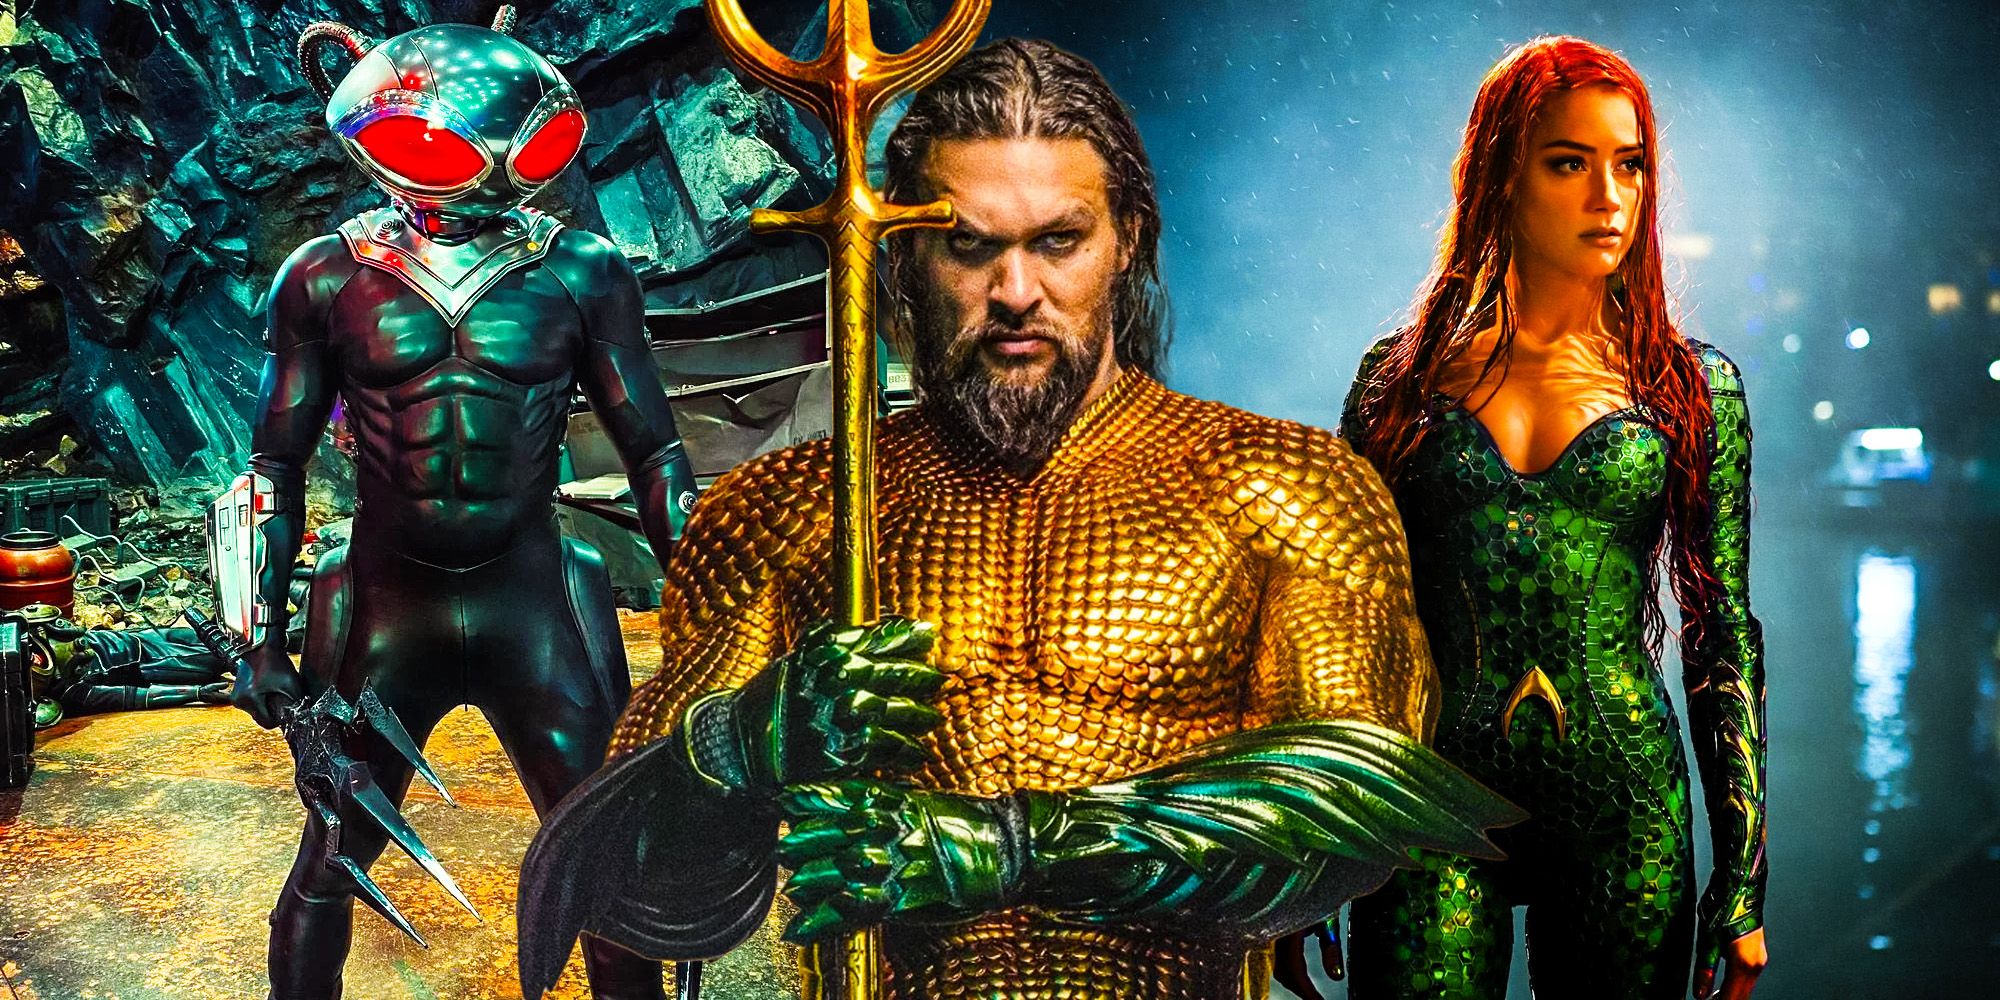 Jason Momoa will reprise his role as Arthur Curry, with Amber Heard returning as Mera of Xebel. 